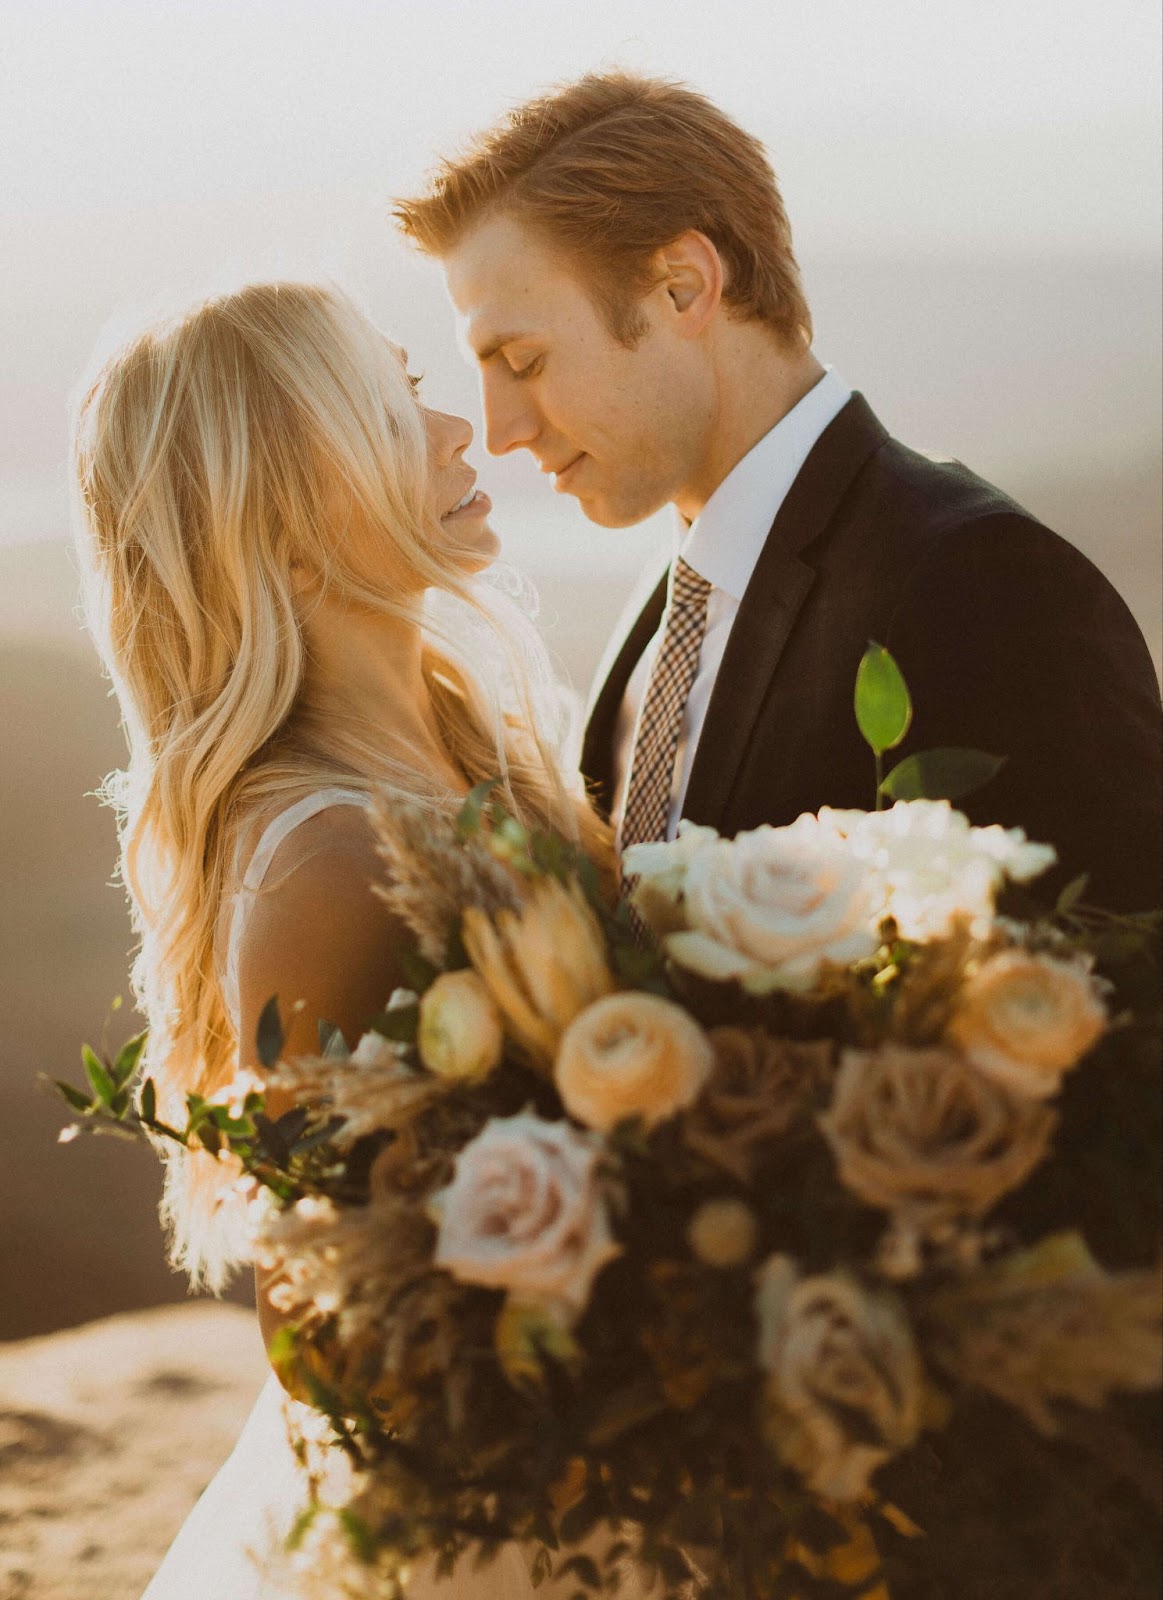 couple getting married holding flowers